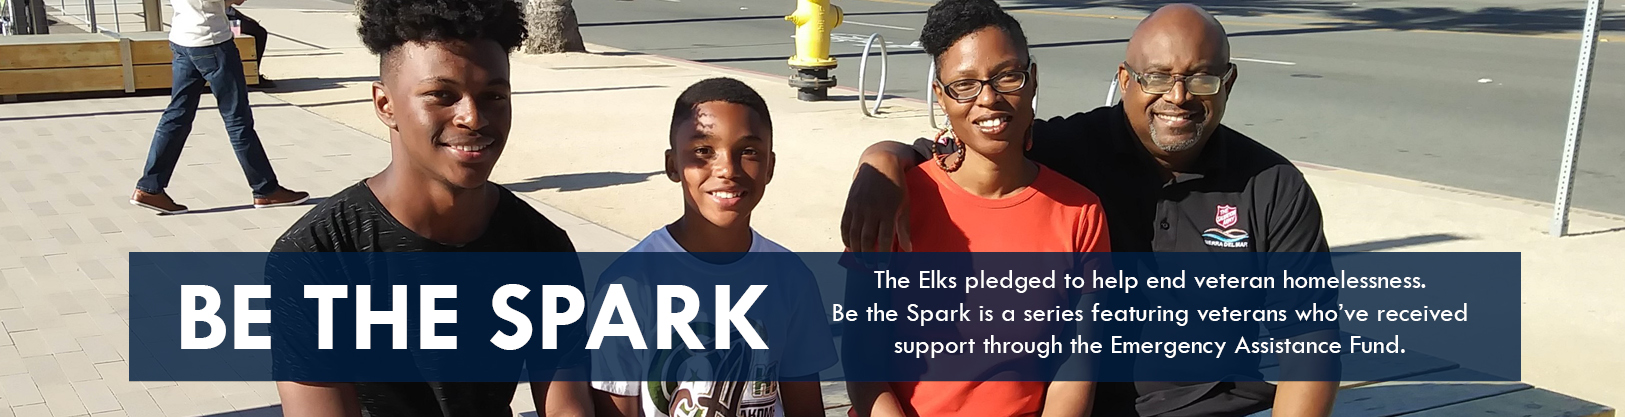 The Elks pledged to help end veteran homelessness. Be the Spark is a series featuring veterans who’ve received support through the Emergency Assistance Fund.